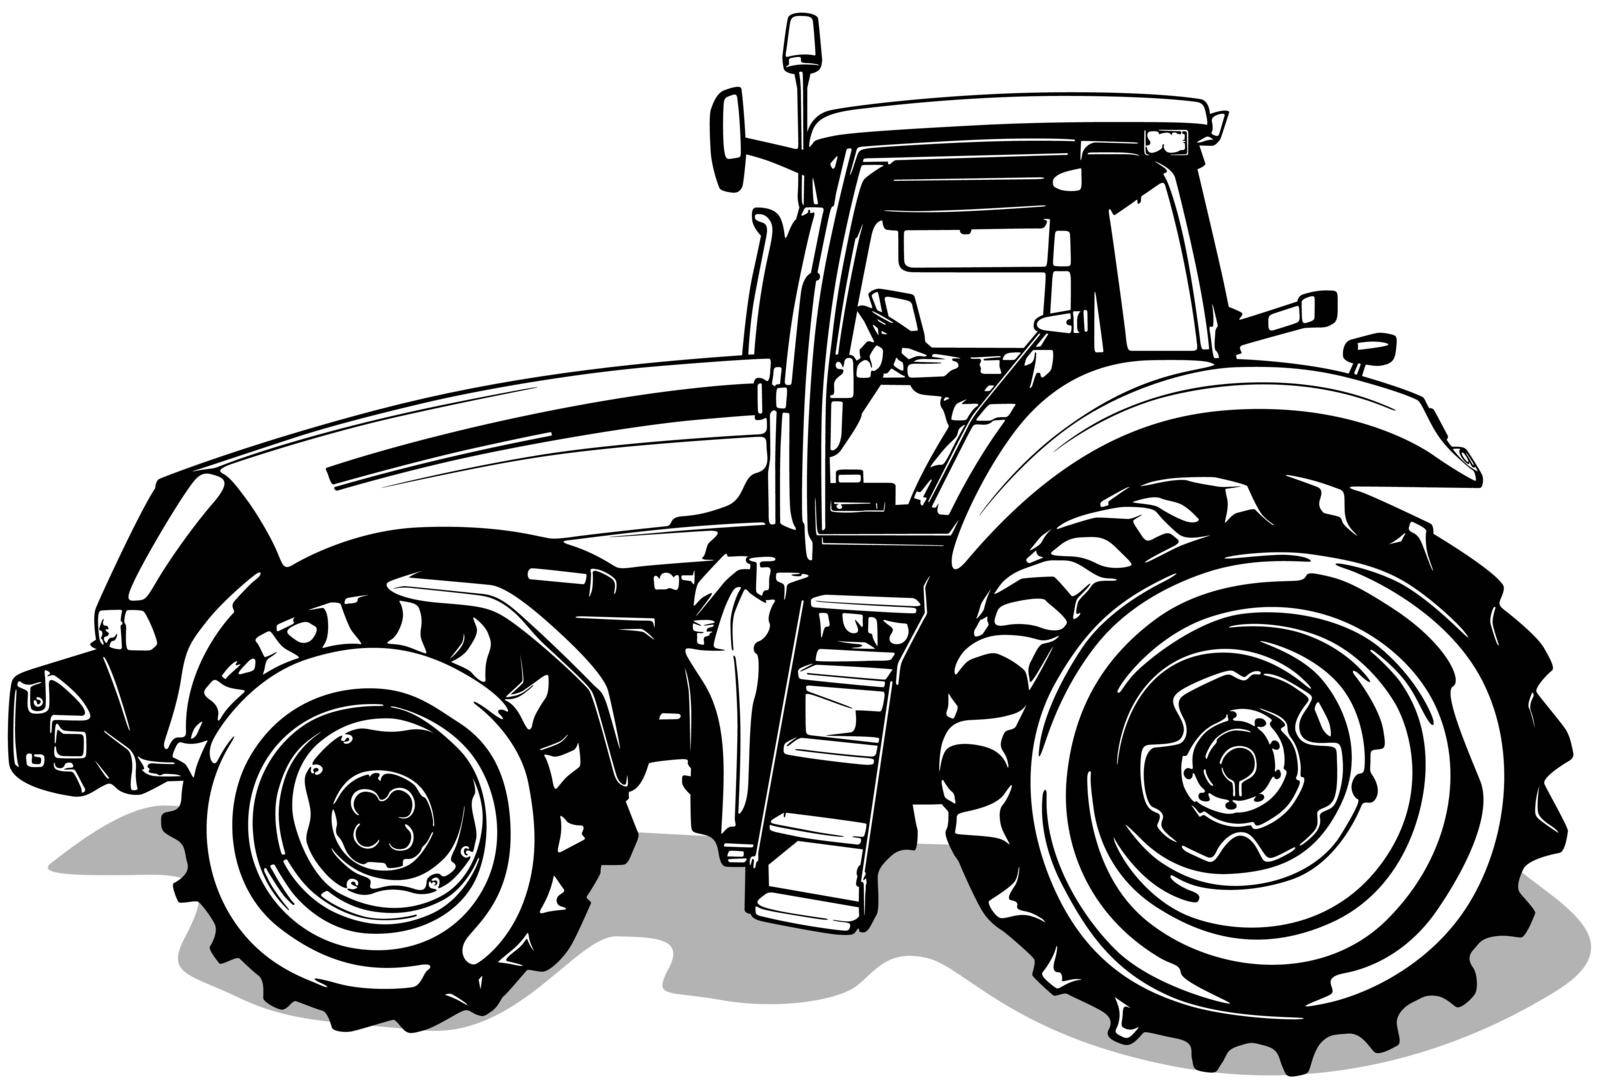 Drawing of Farm Tractor from Side View - Black Illustration Isolated on White Background, Vector